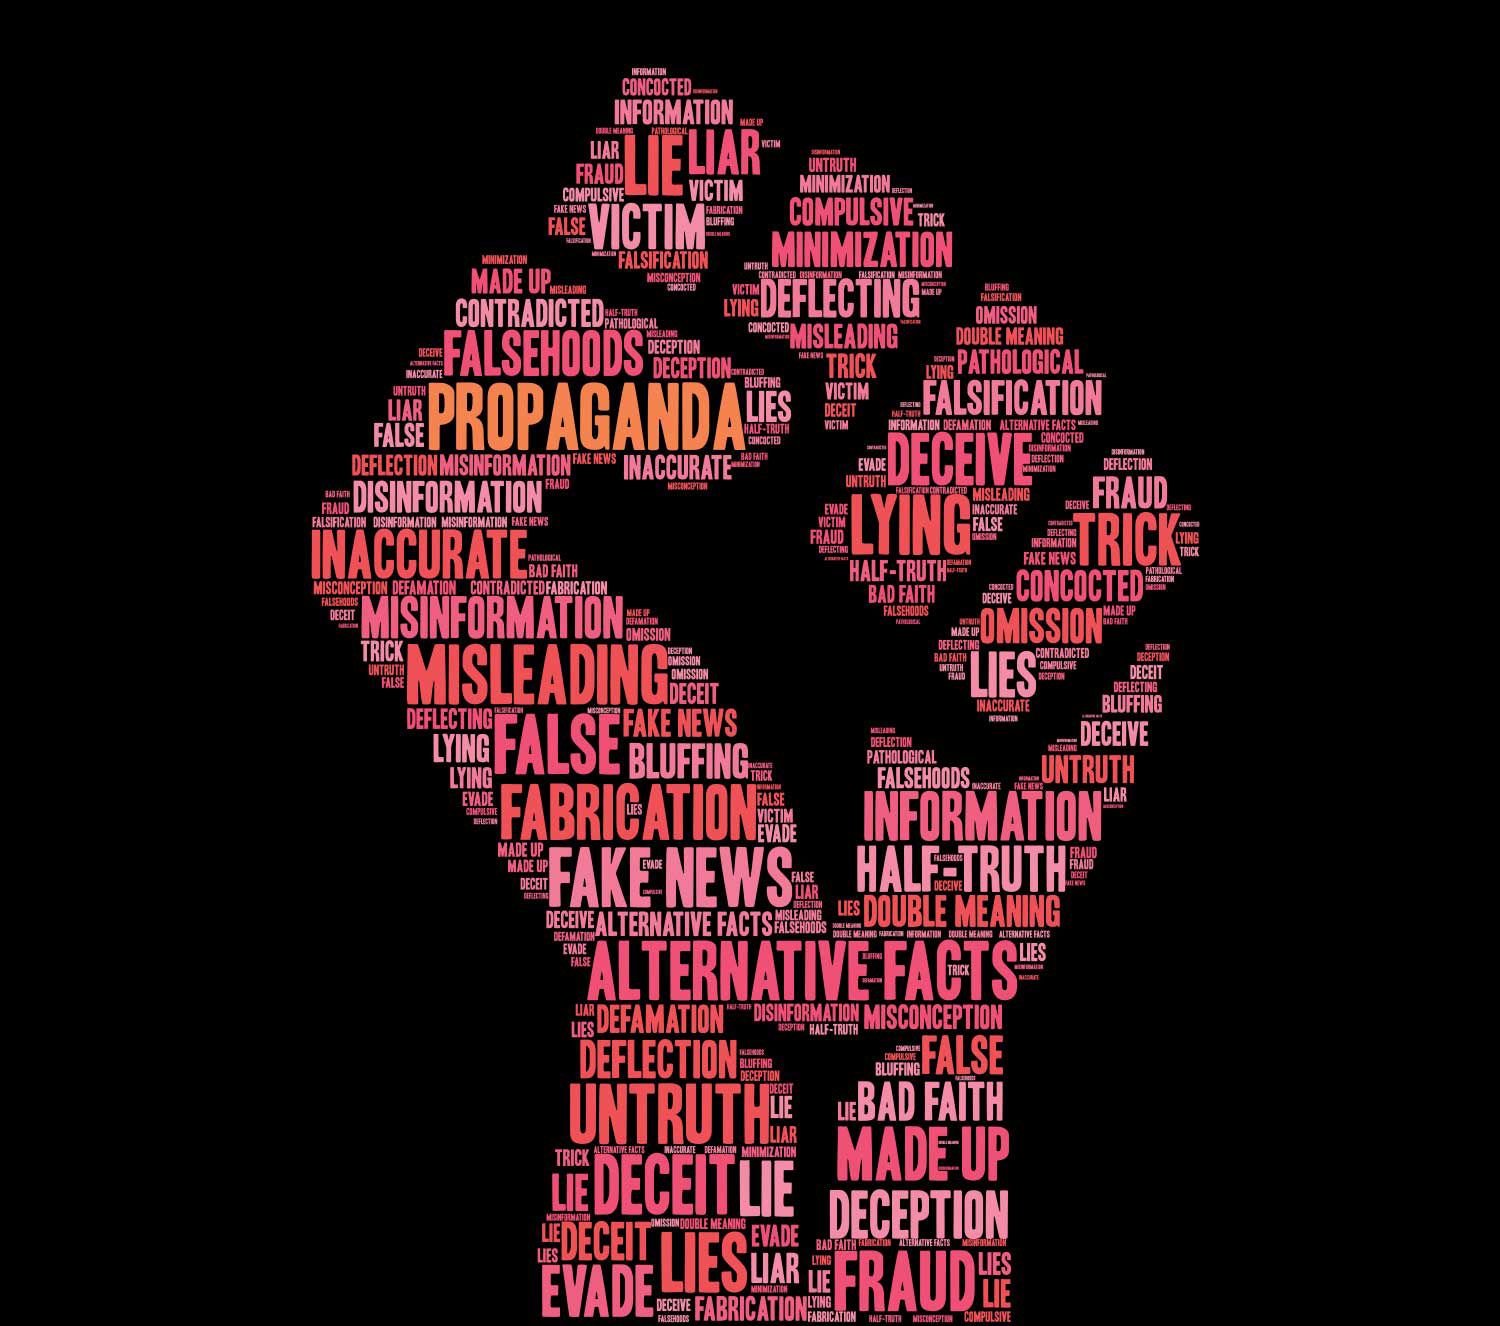 Graphic of a fist raised, made up of communication words